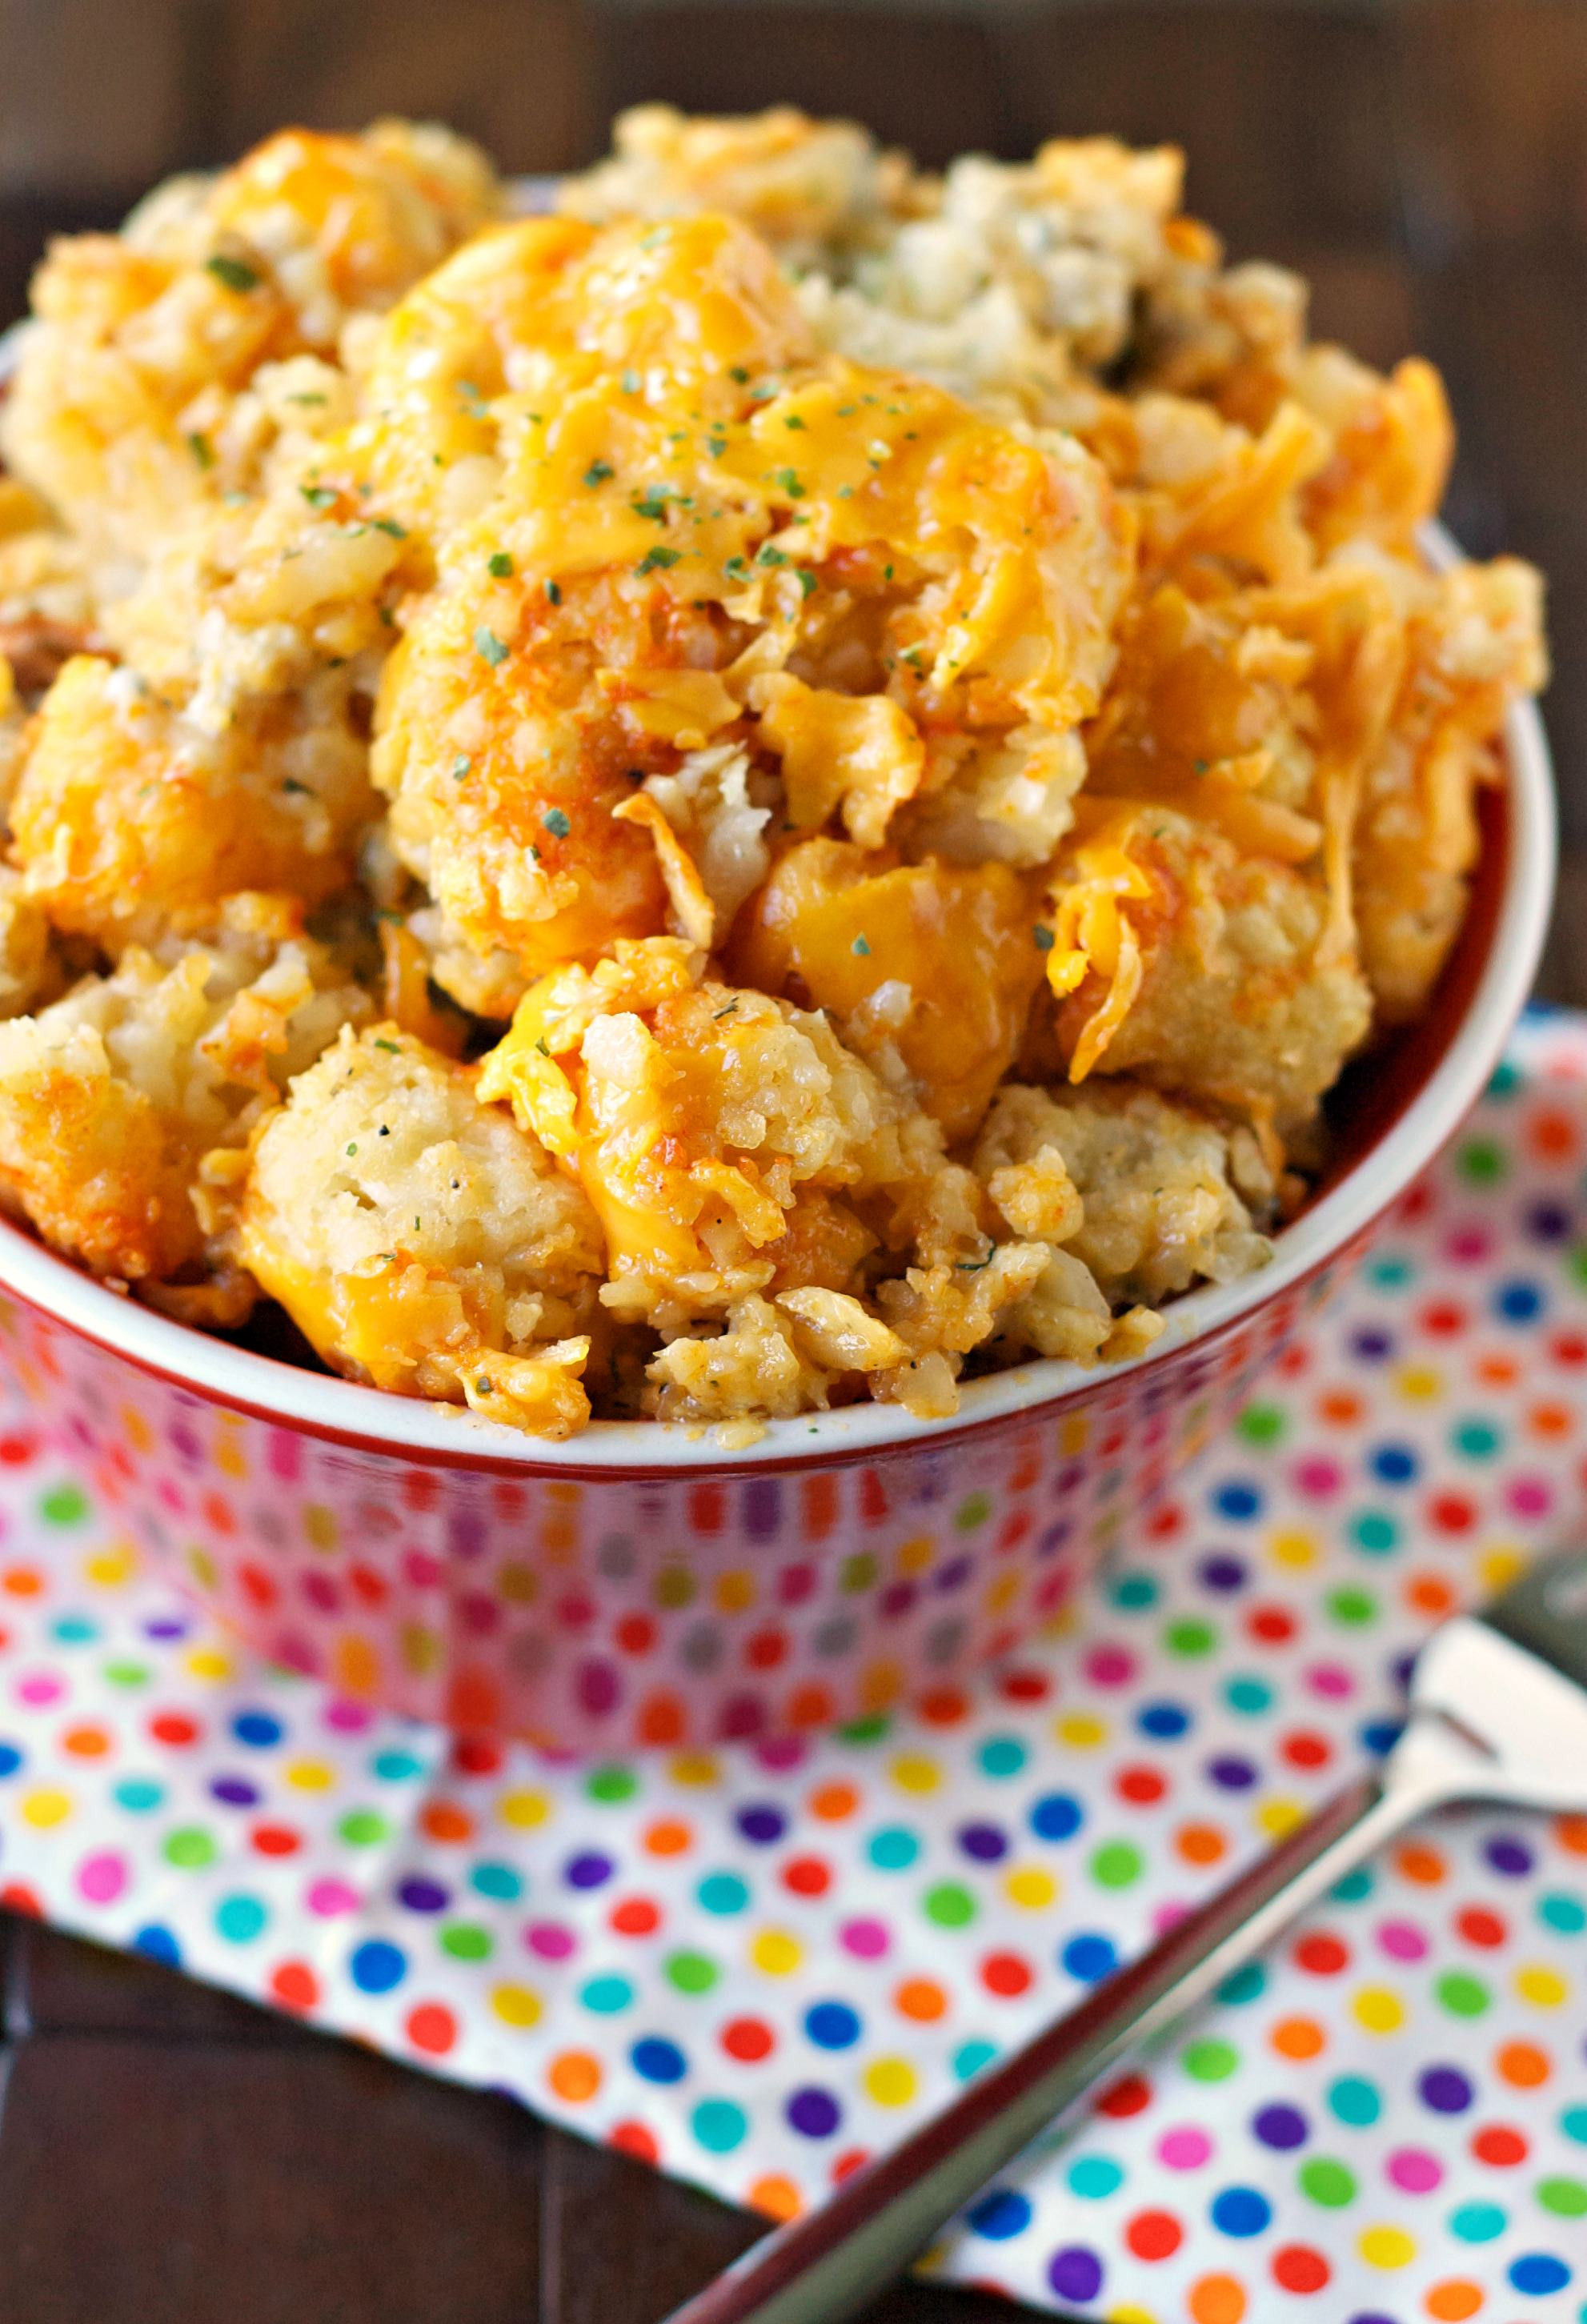 Tater Tot Casserole With Cream Of Chicken
 Slow Cooker Buffalo Chicken Tater Tot Casserole